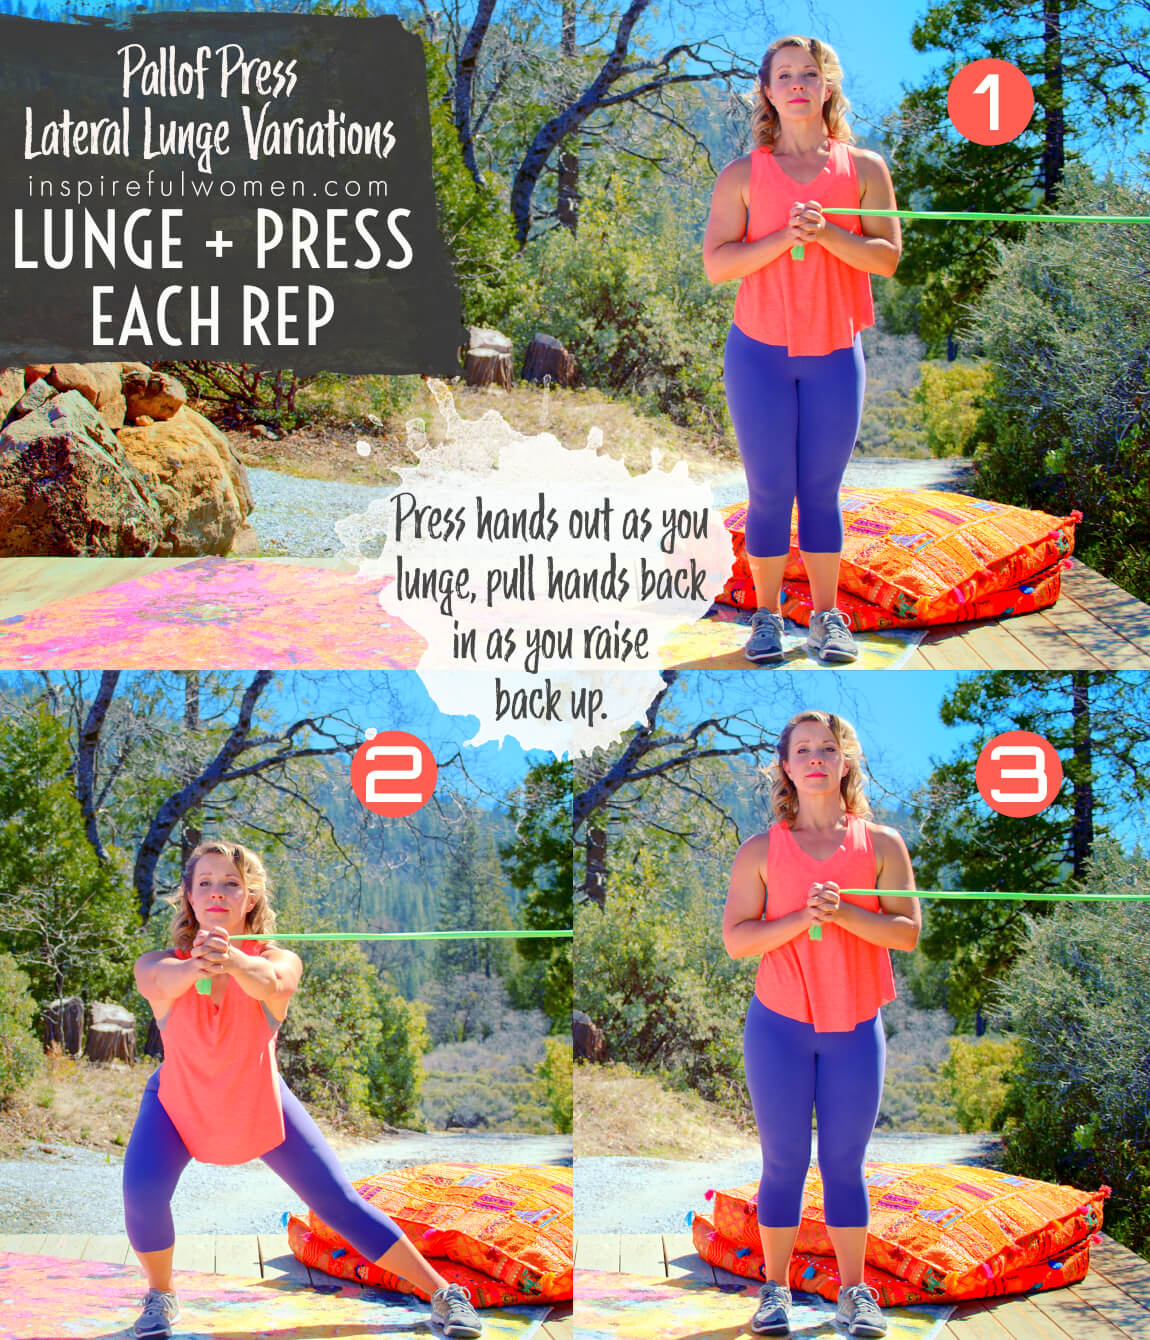 lunge-press-each-repetition-pallof-press-lateral-lunge-core-exercise-variation